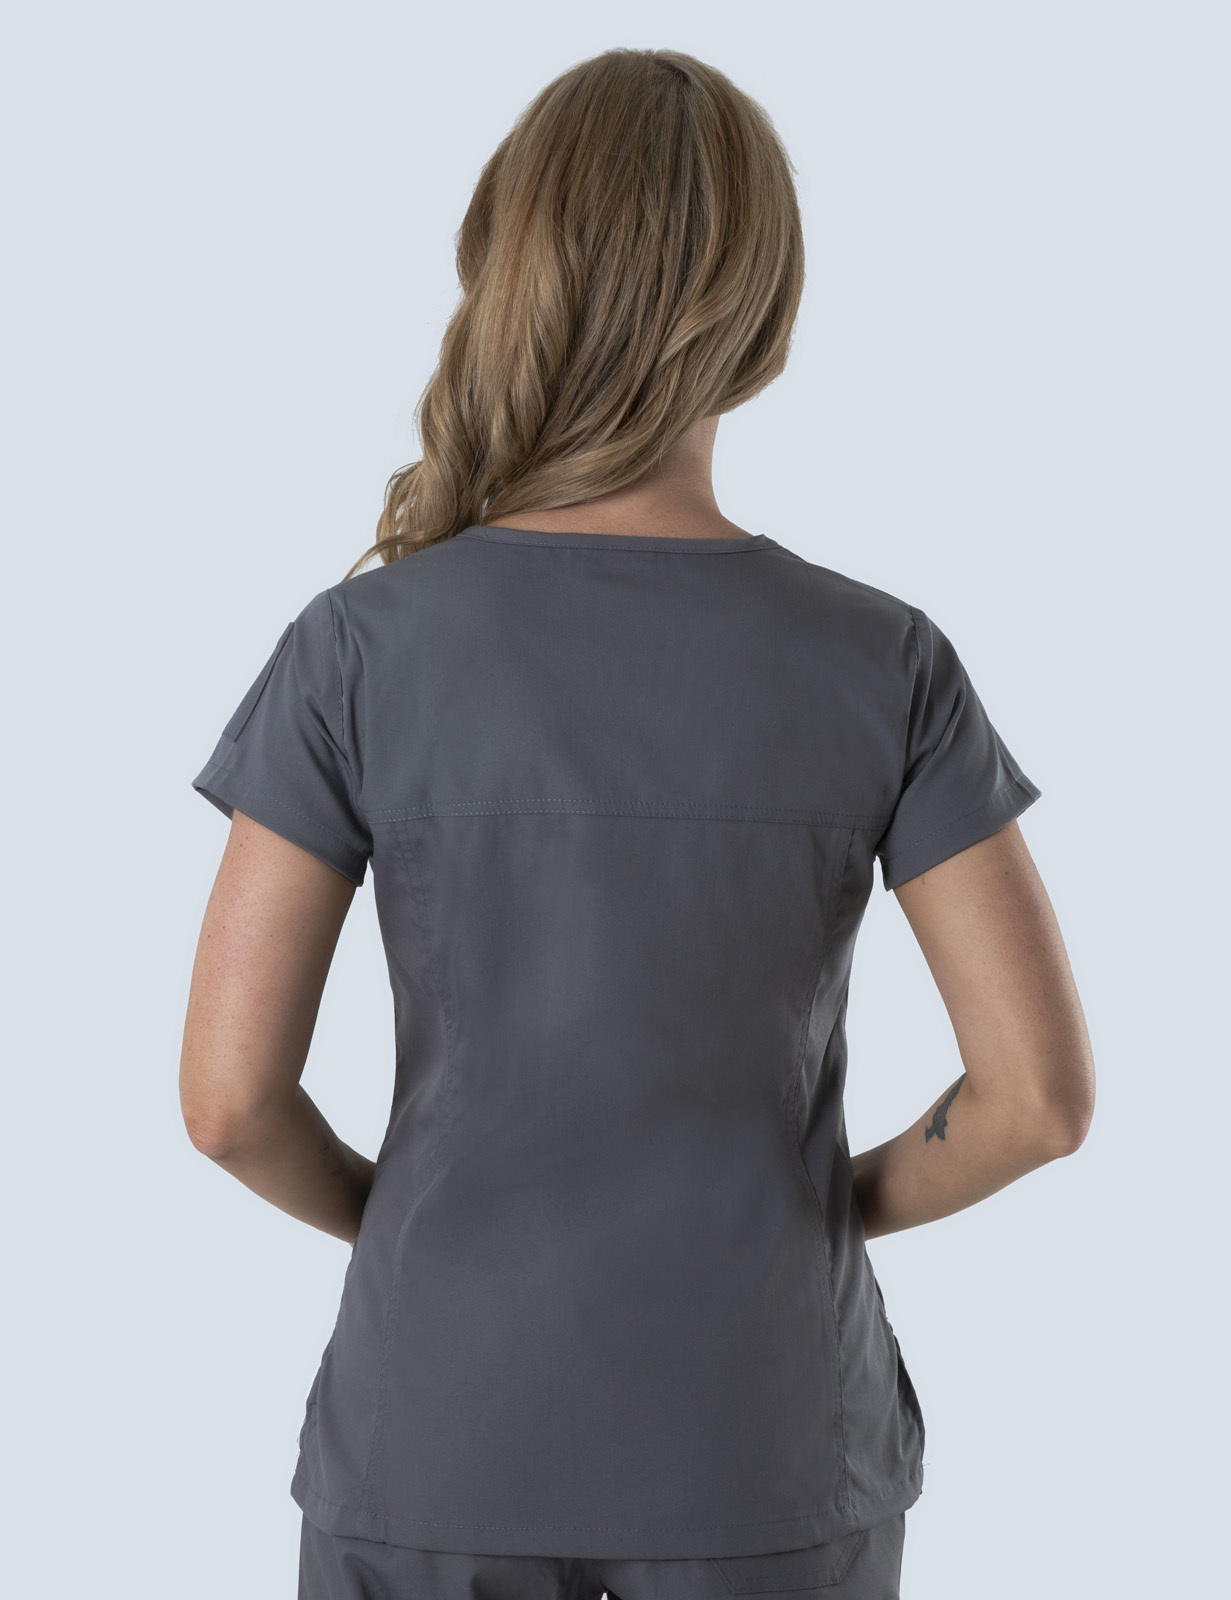 Women's Fit Solid Scrub Top - Steel Grey - X Large